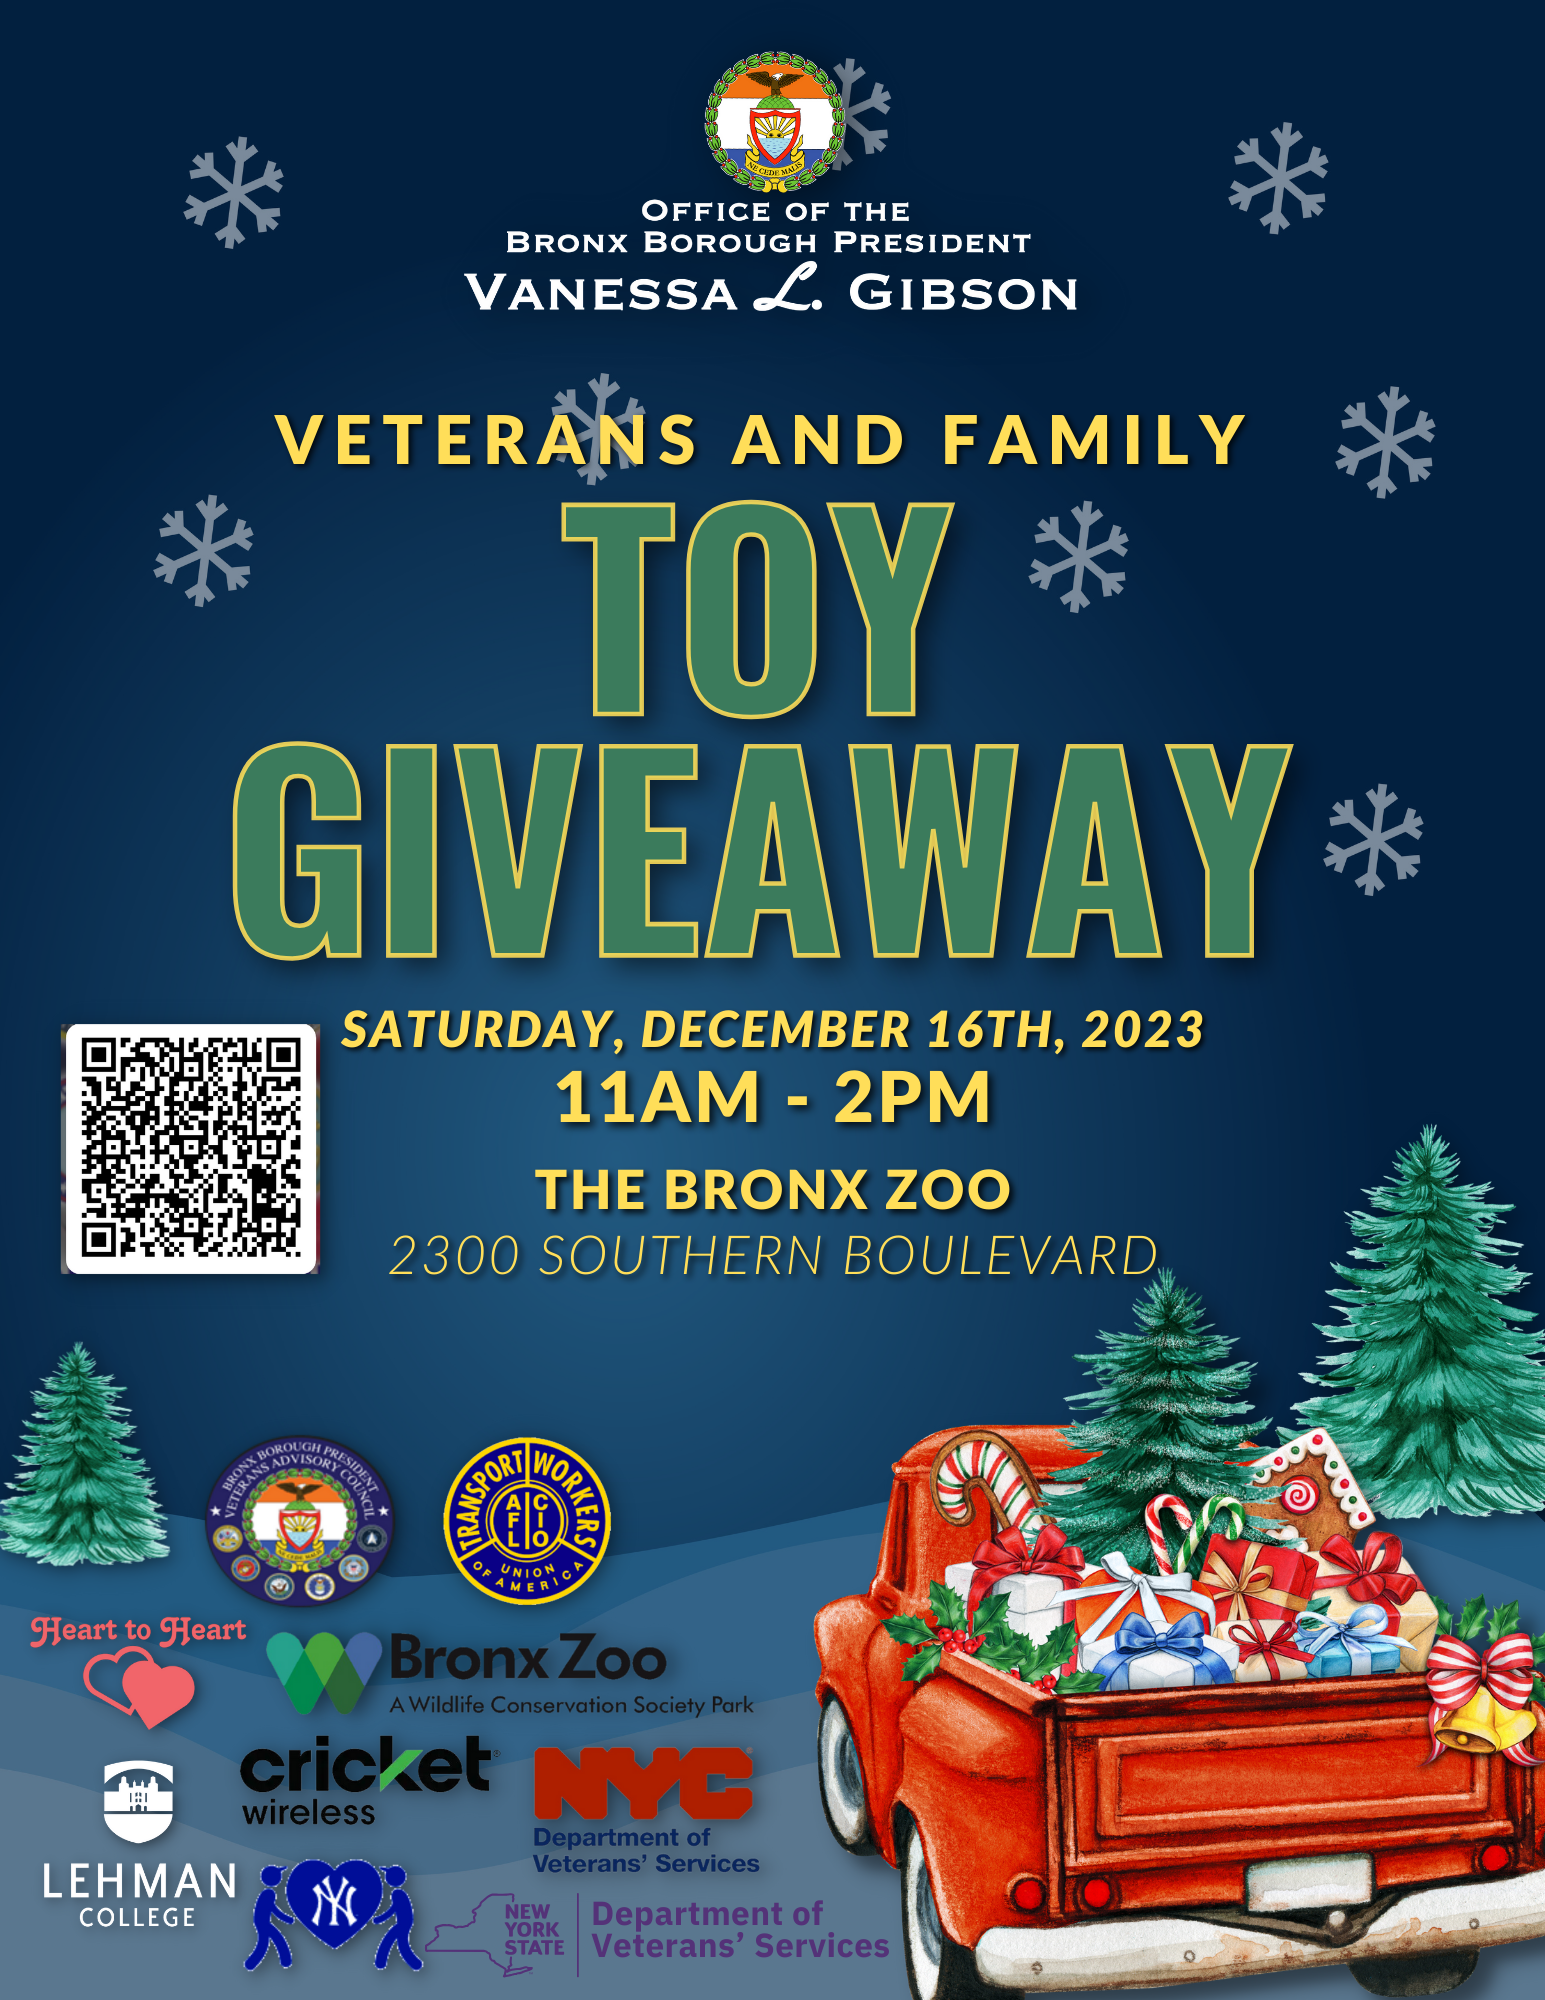 A flyer for a Veterans and Family Toy Giveaway event on December 16, 2023.